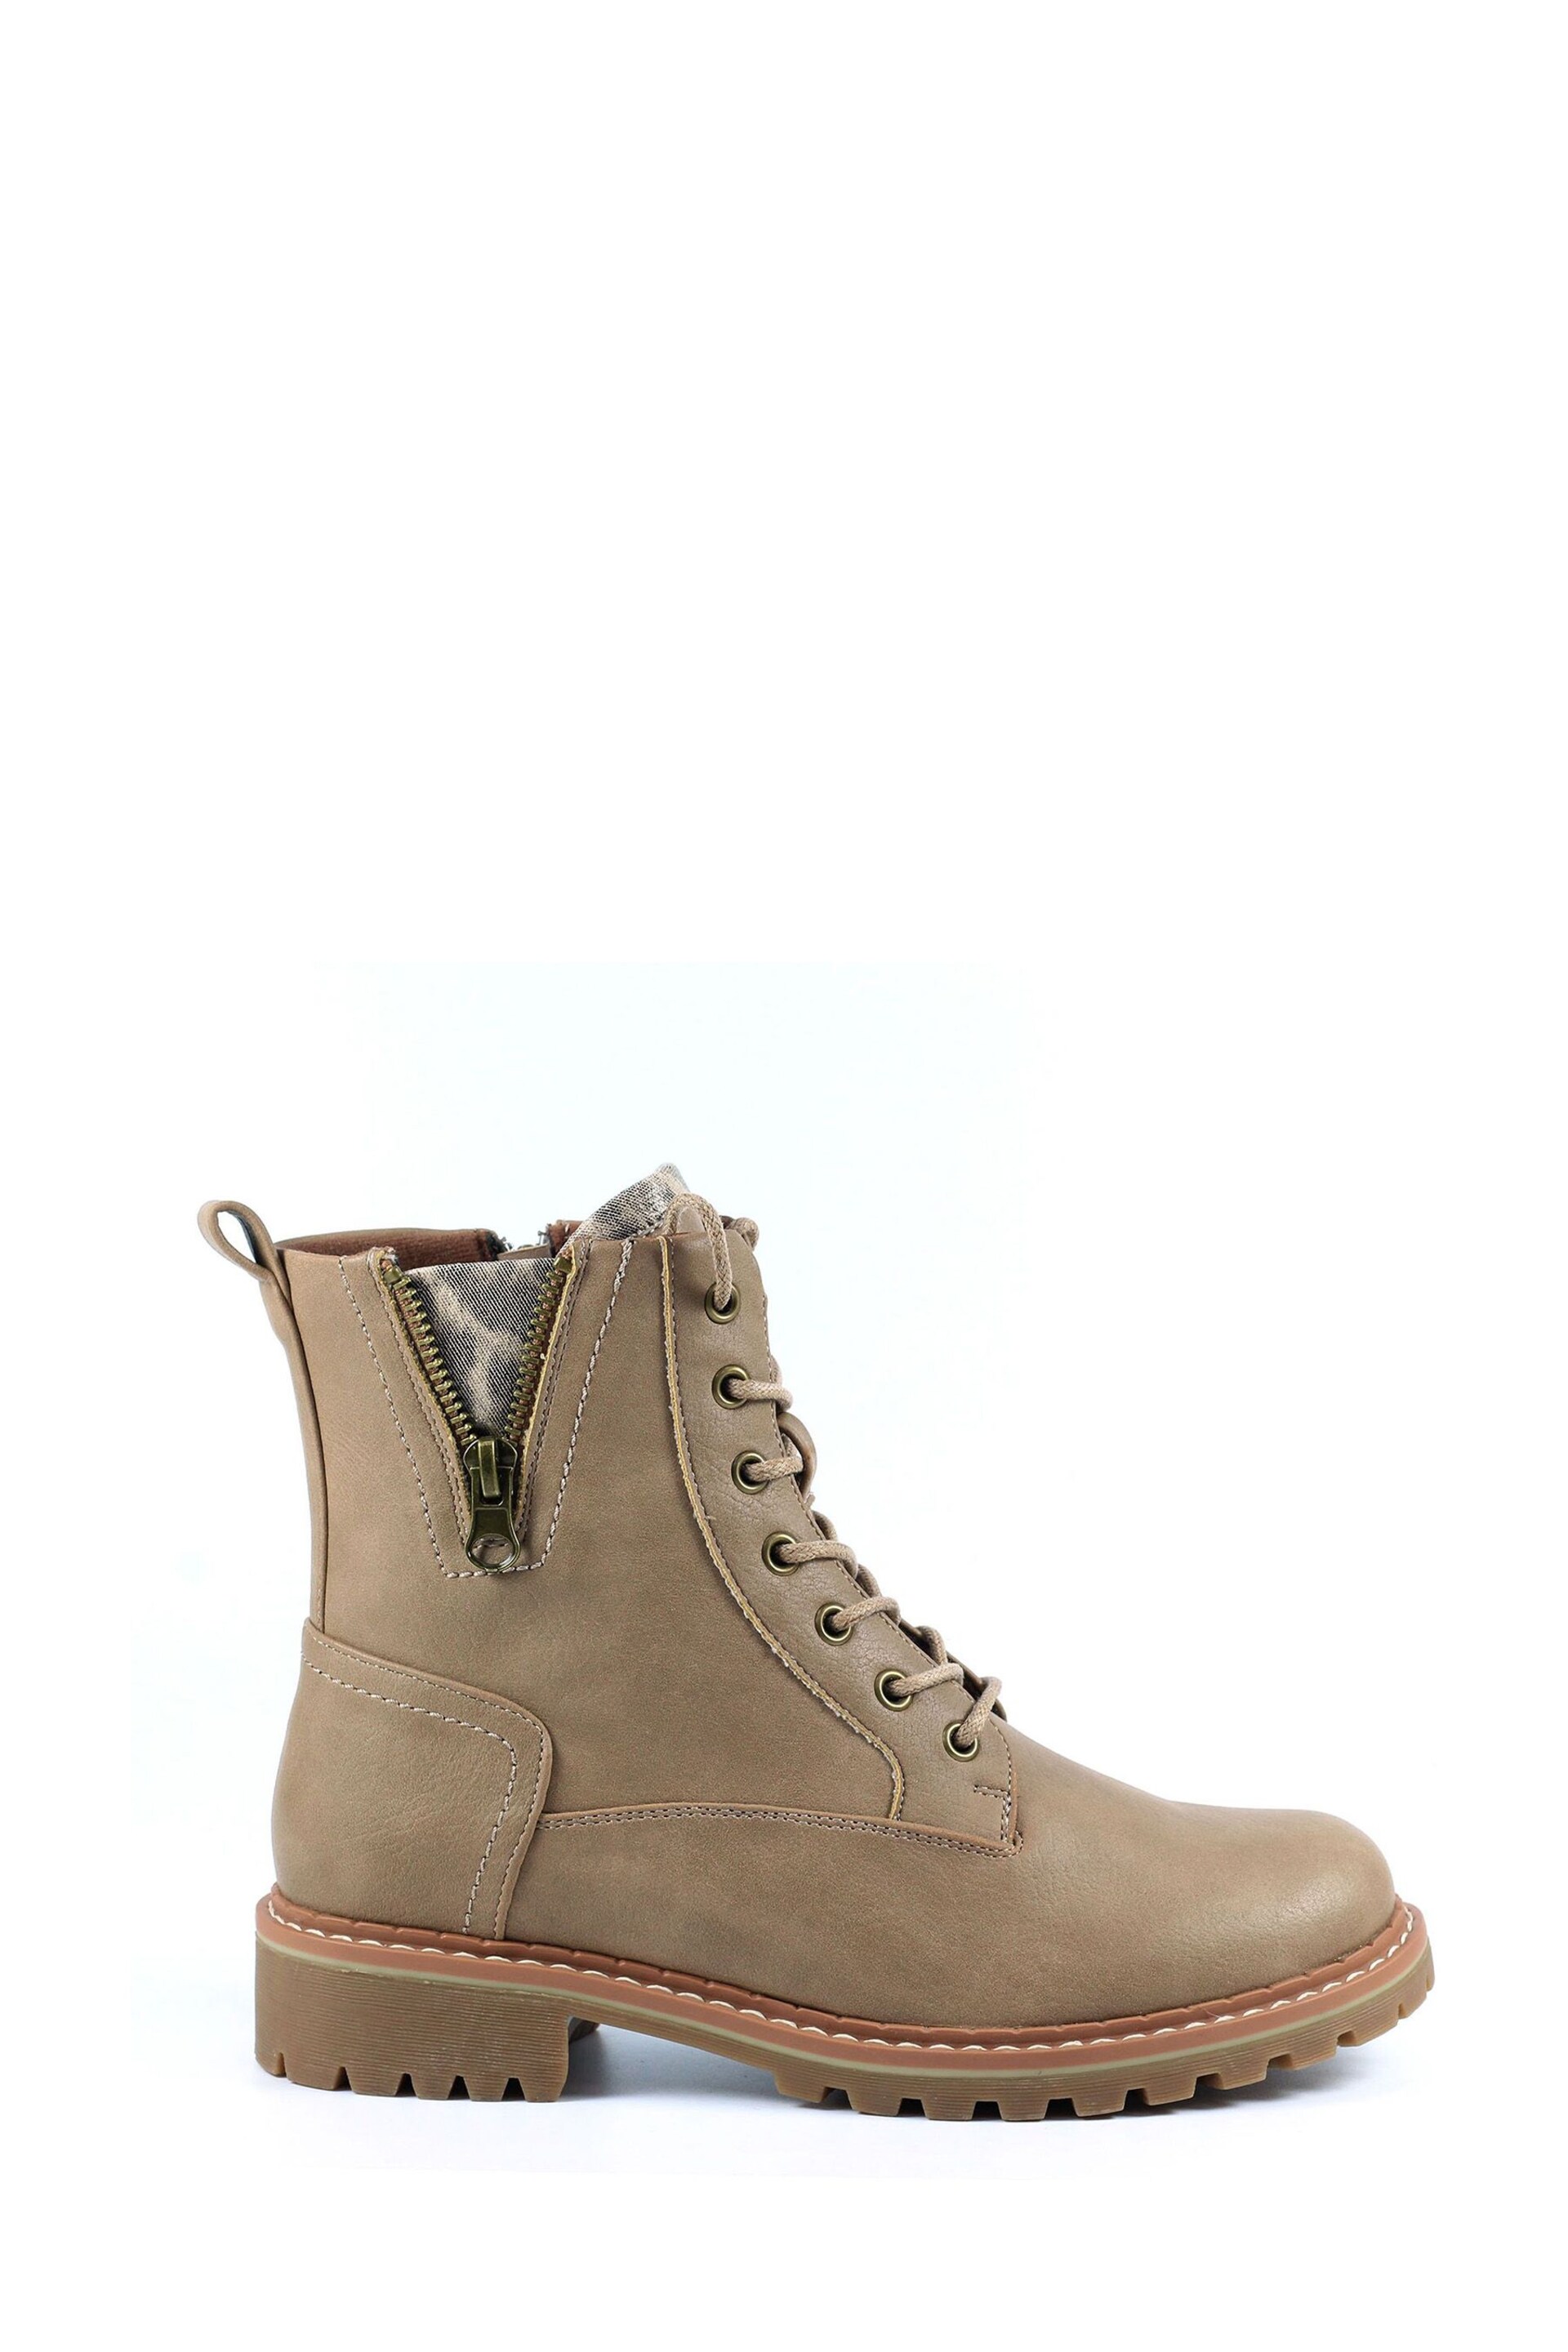 Lunar Natural Nevada Stone Laceup Ankle Boots - Image 1 of 9